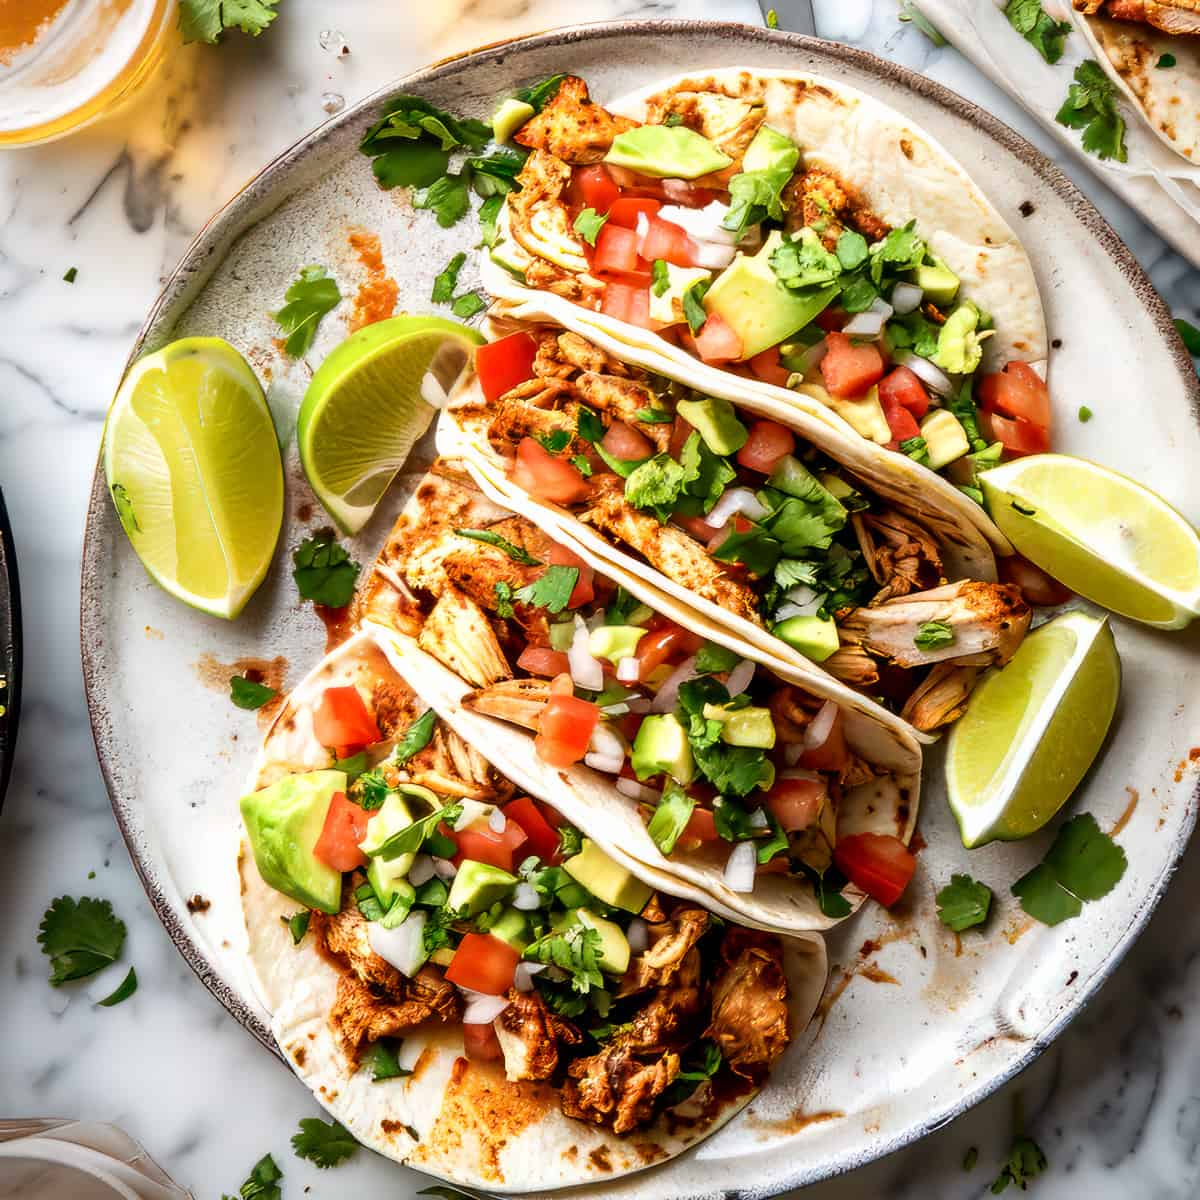 Pulled chicken tacos in tortillas with chopped tomatoes and avocado on a white plate.